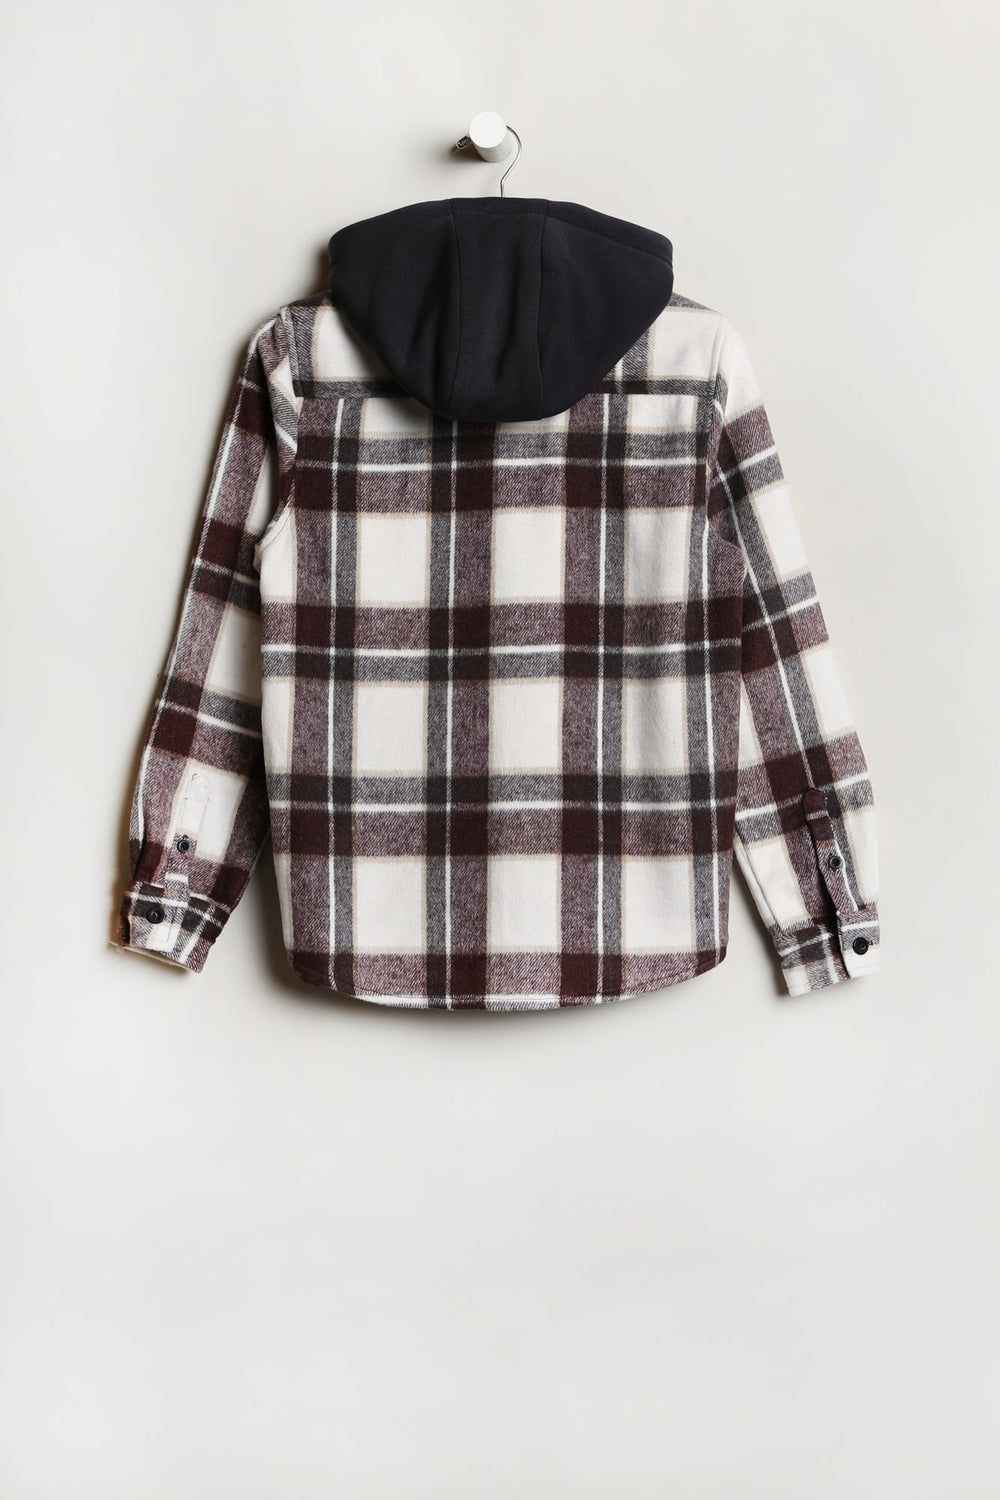 West49 Youth Hooded Plaid Shacket Brown